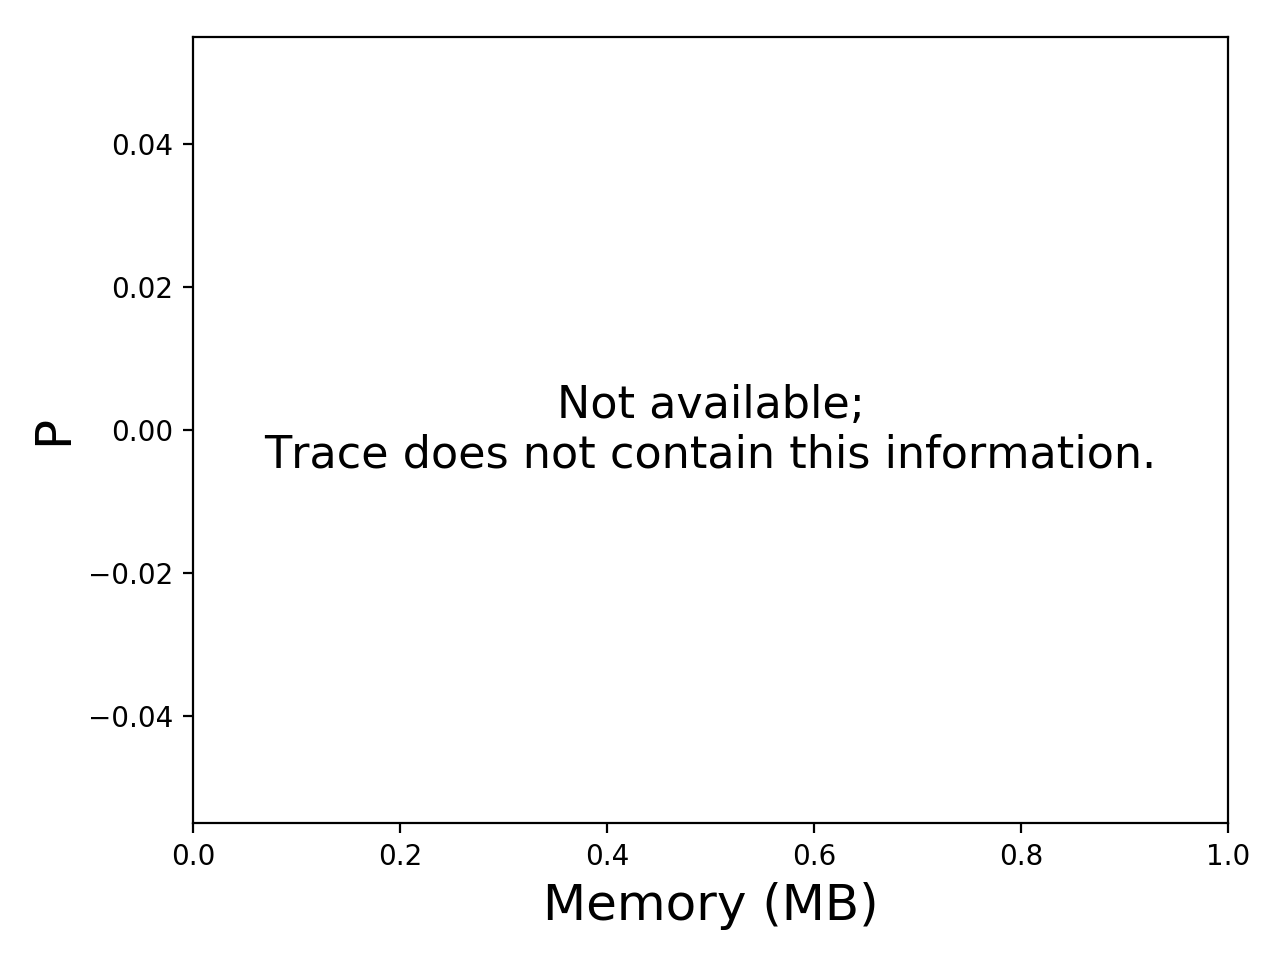 Task memory consumption graph for the workflowhub_montage_dataset-02_degree-2-0_osg_schema-0-2_montage-2-0-osg-run007 trace.